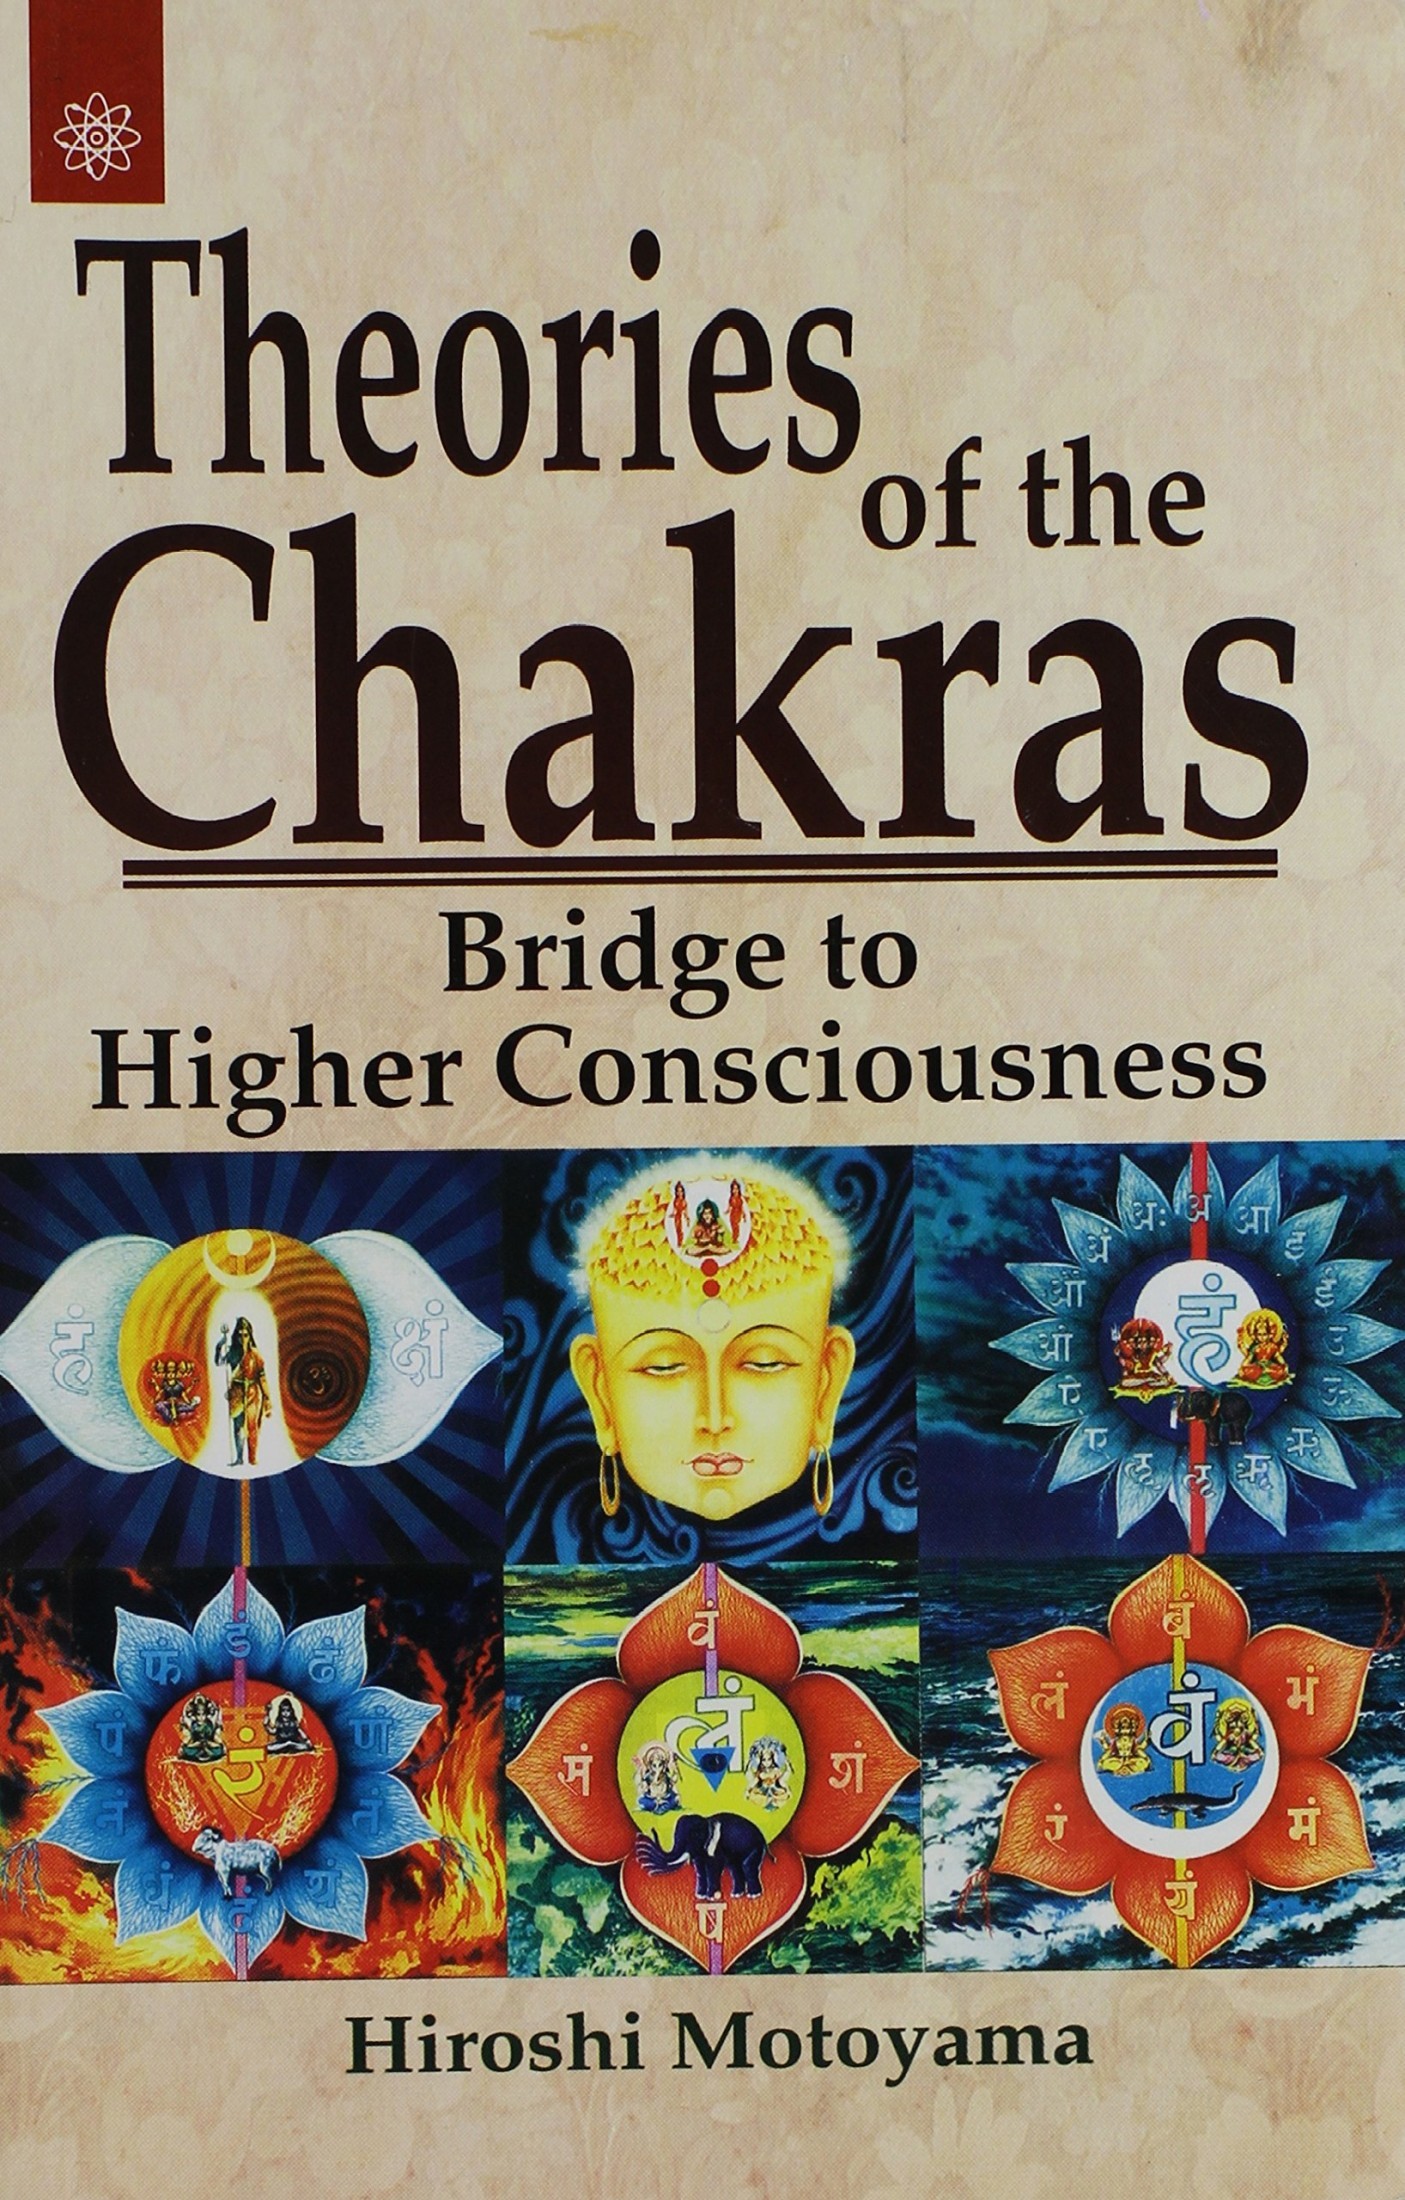 Theories of the Chakras: Bridge to Higher Consciousness